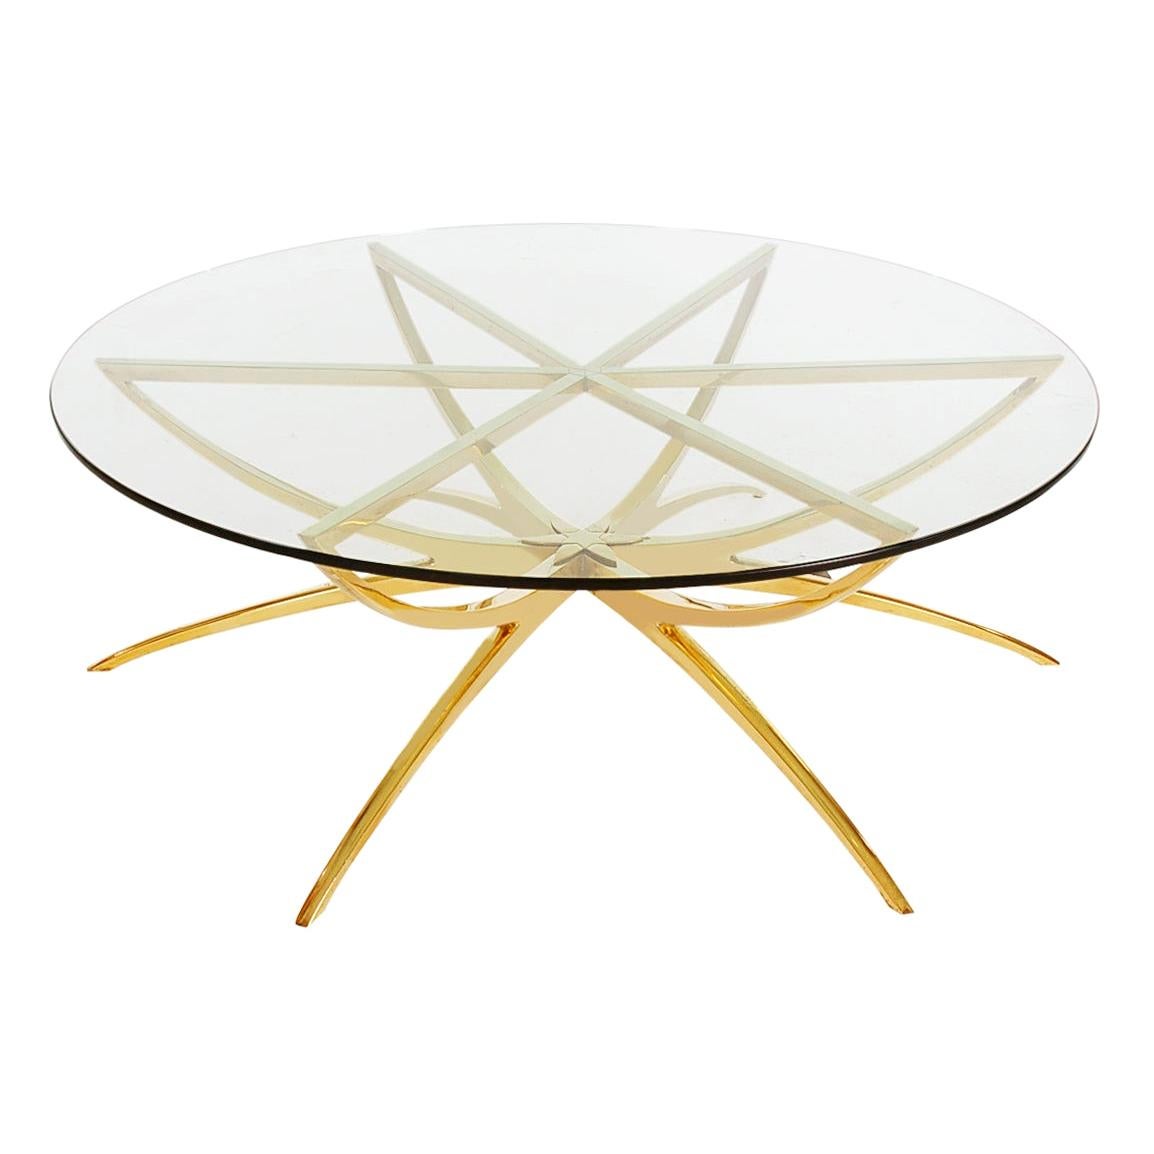 Solid Brass Midcentury Italian Modern Round Glass Top Spider Cocktail Table For Sale